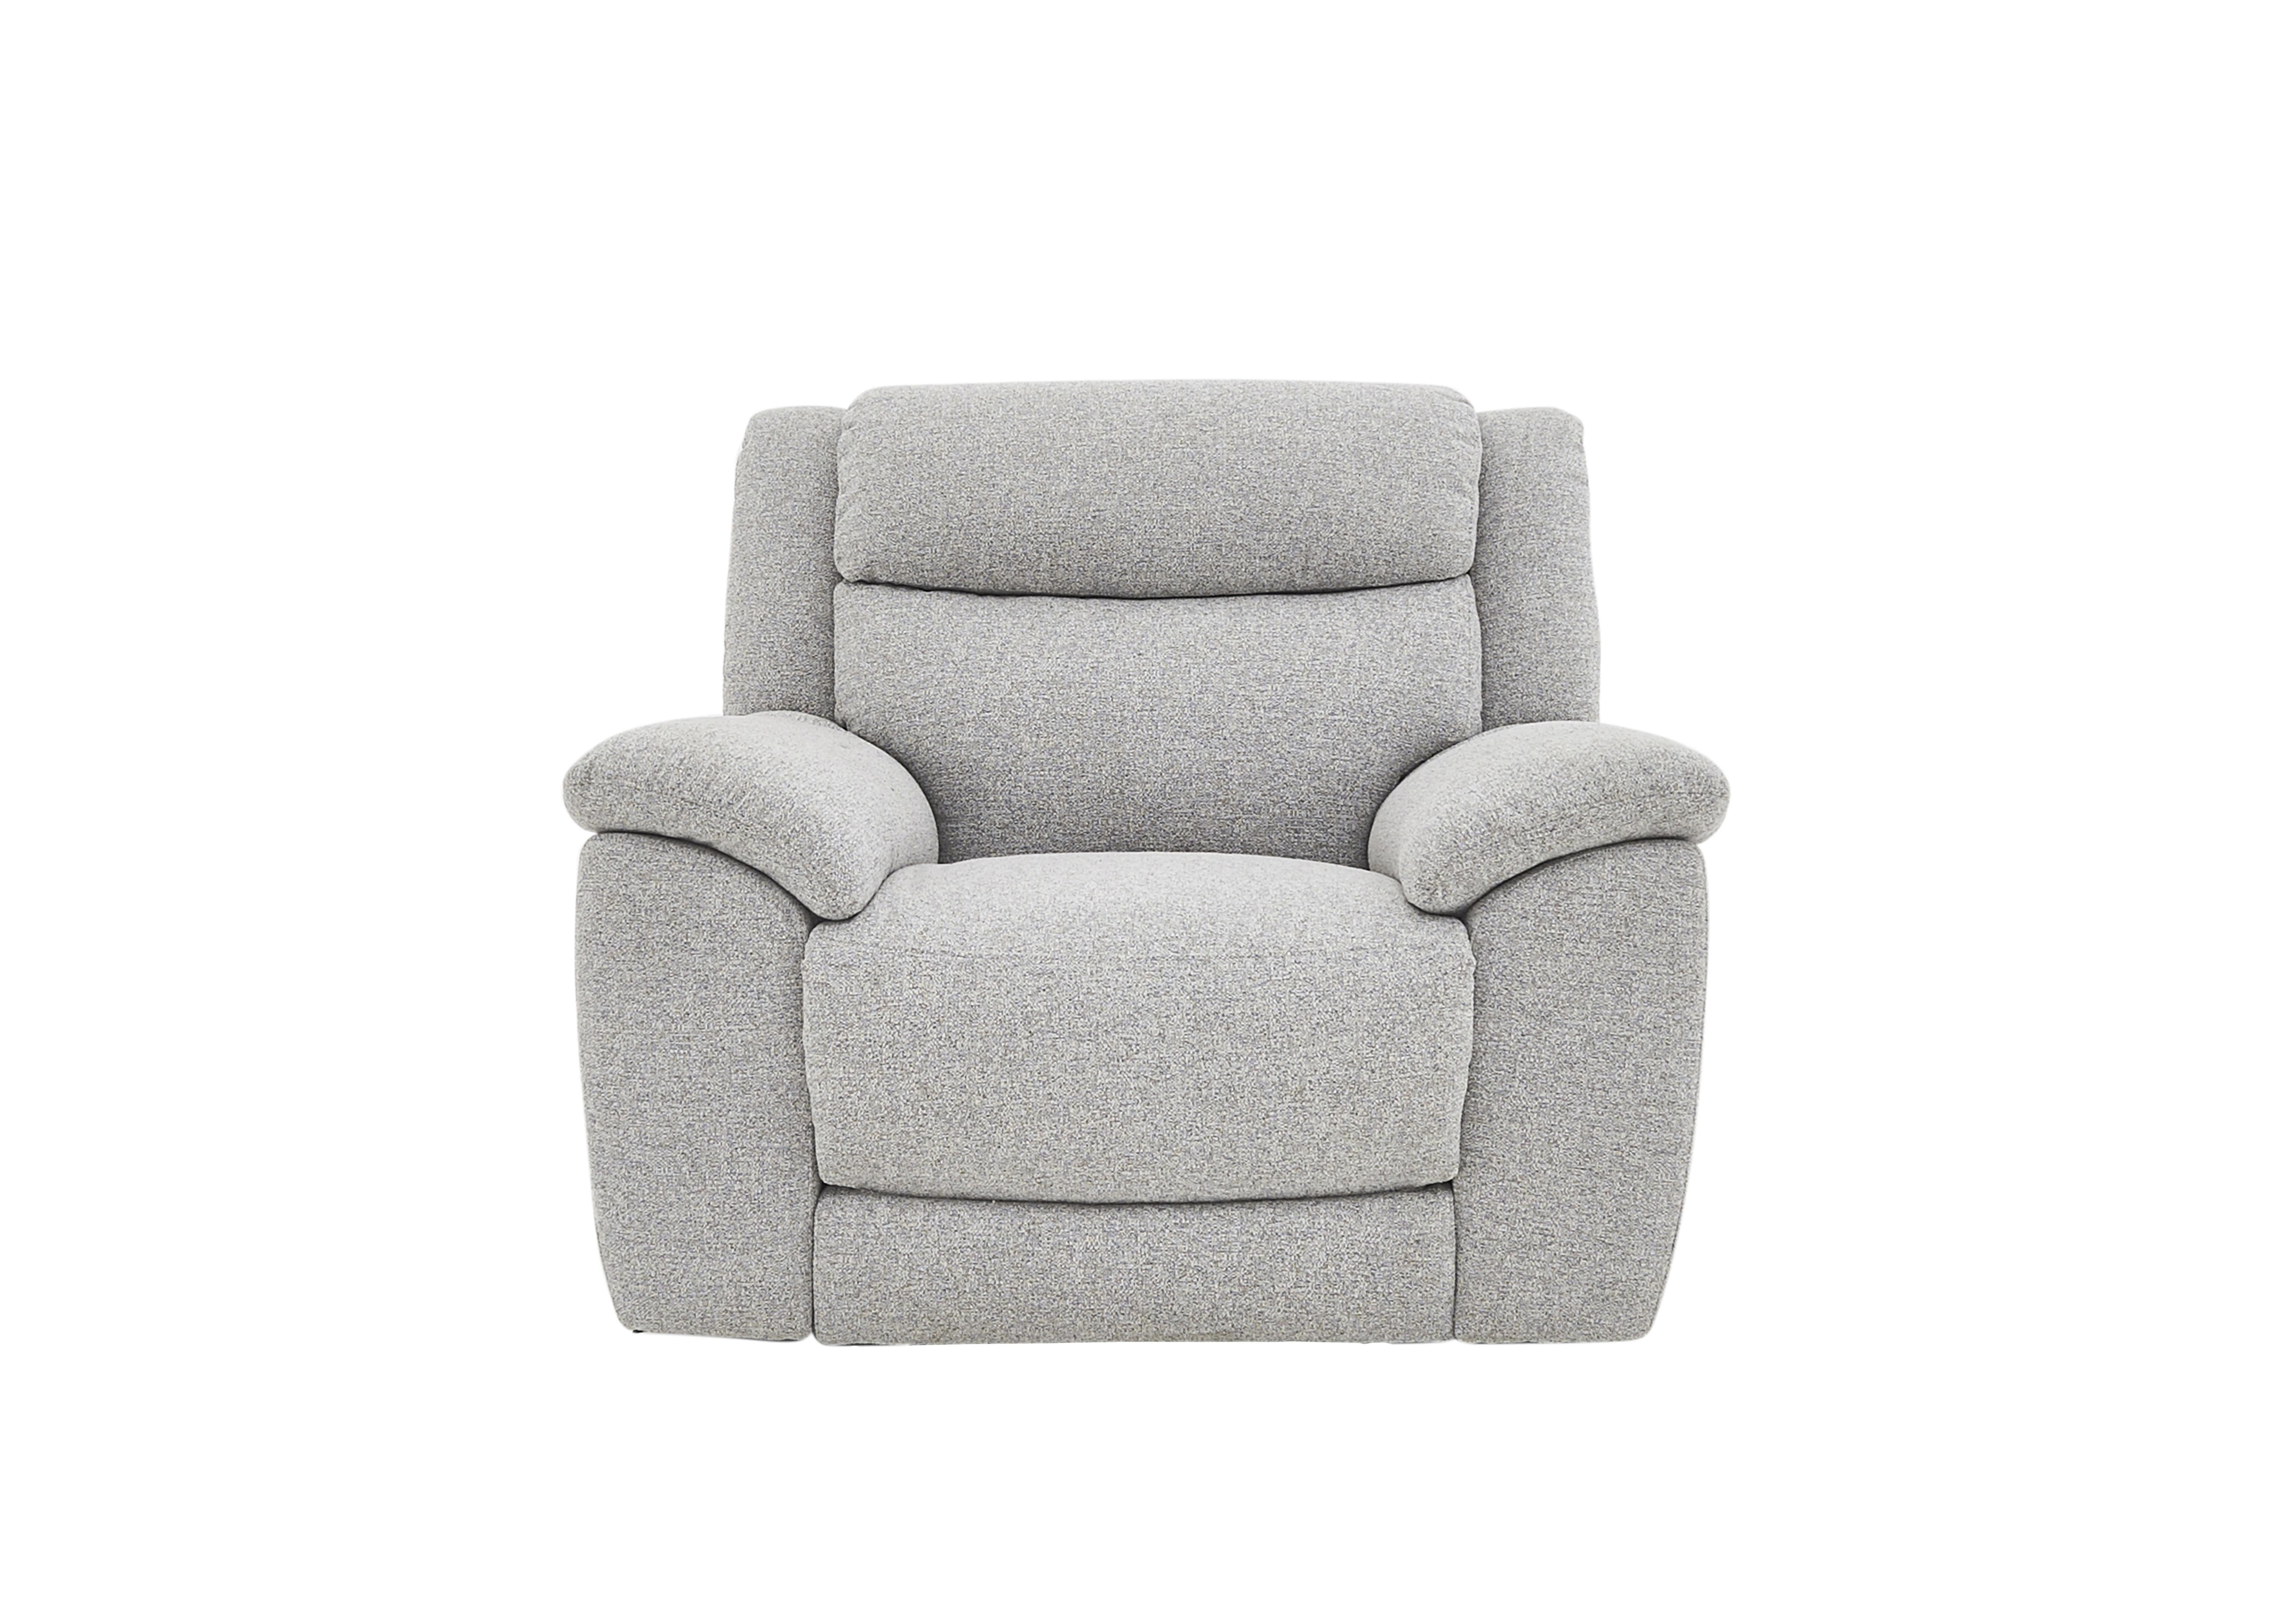 Fabric Recliner Chairs Electric Manual Furniture Village